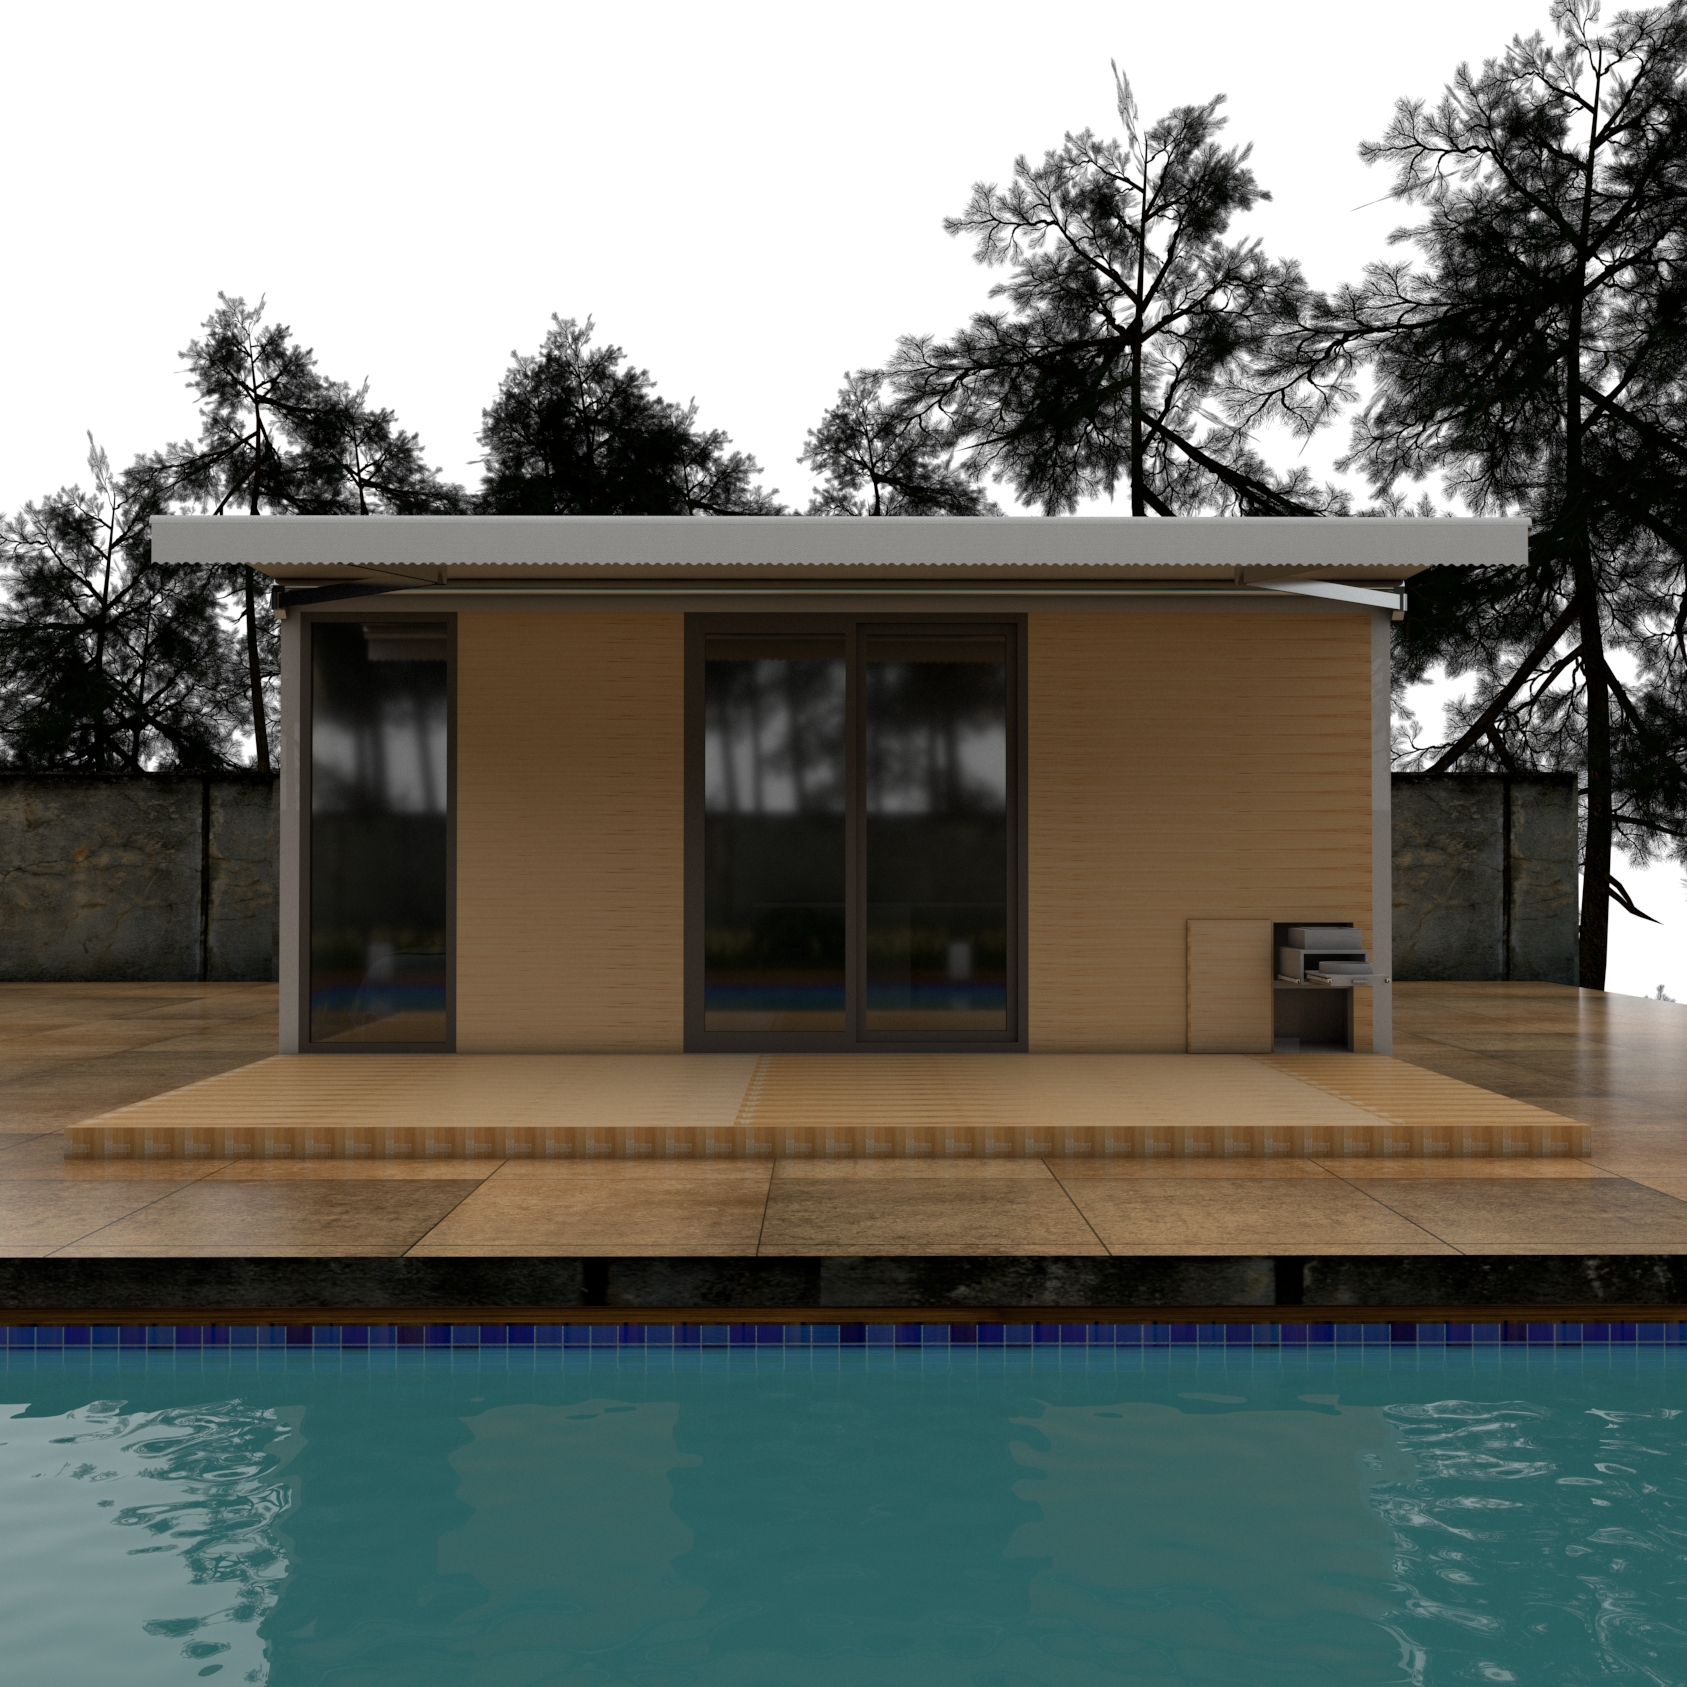 20ft 40ft Log Cabins Wooden House Prefabricated Be Shipped After Finished in Factory for Villas Vacations Private Clubs